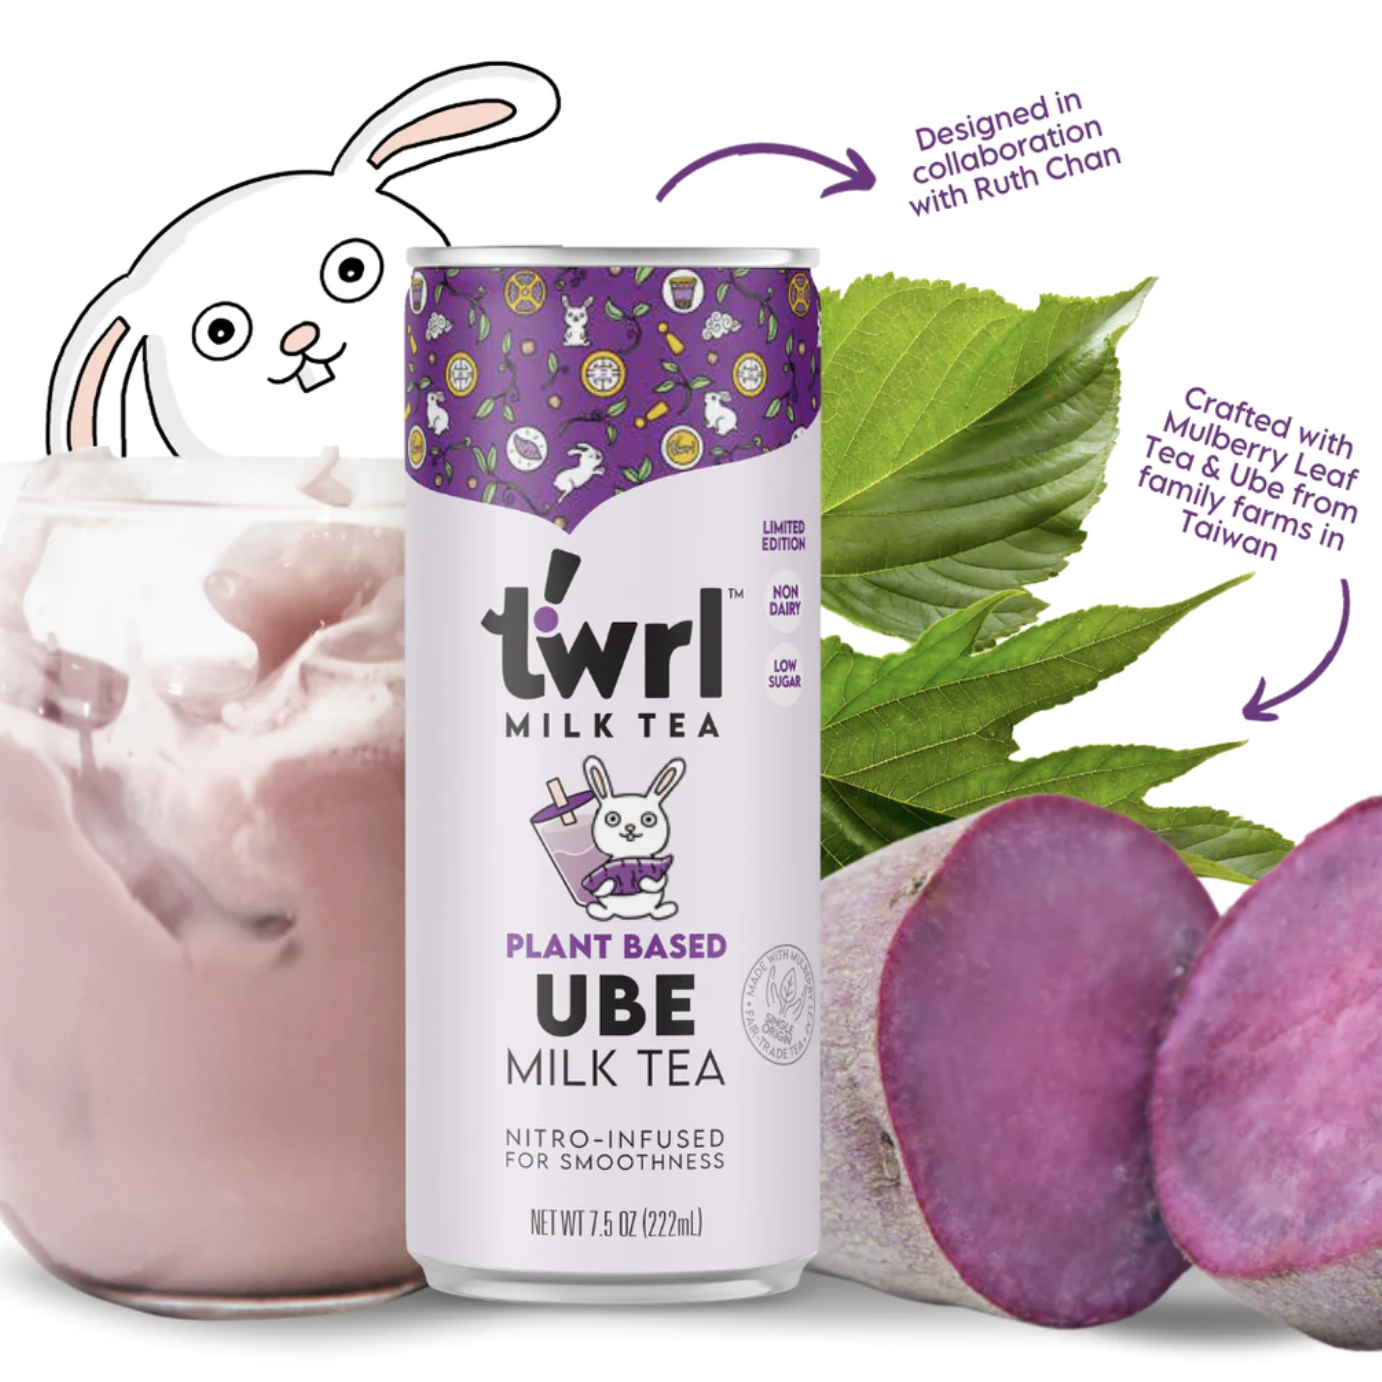 Can of milk tea surrounded by cartoon bunny, ube milk tea in glass, and ingredients.